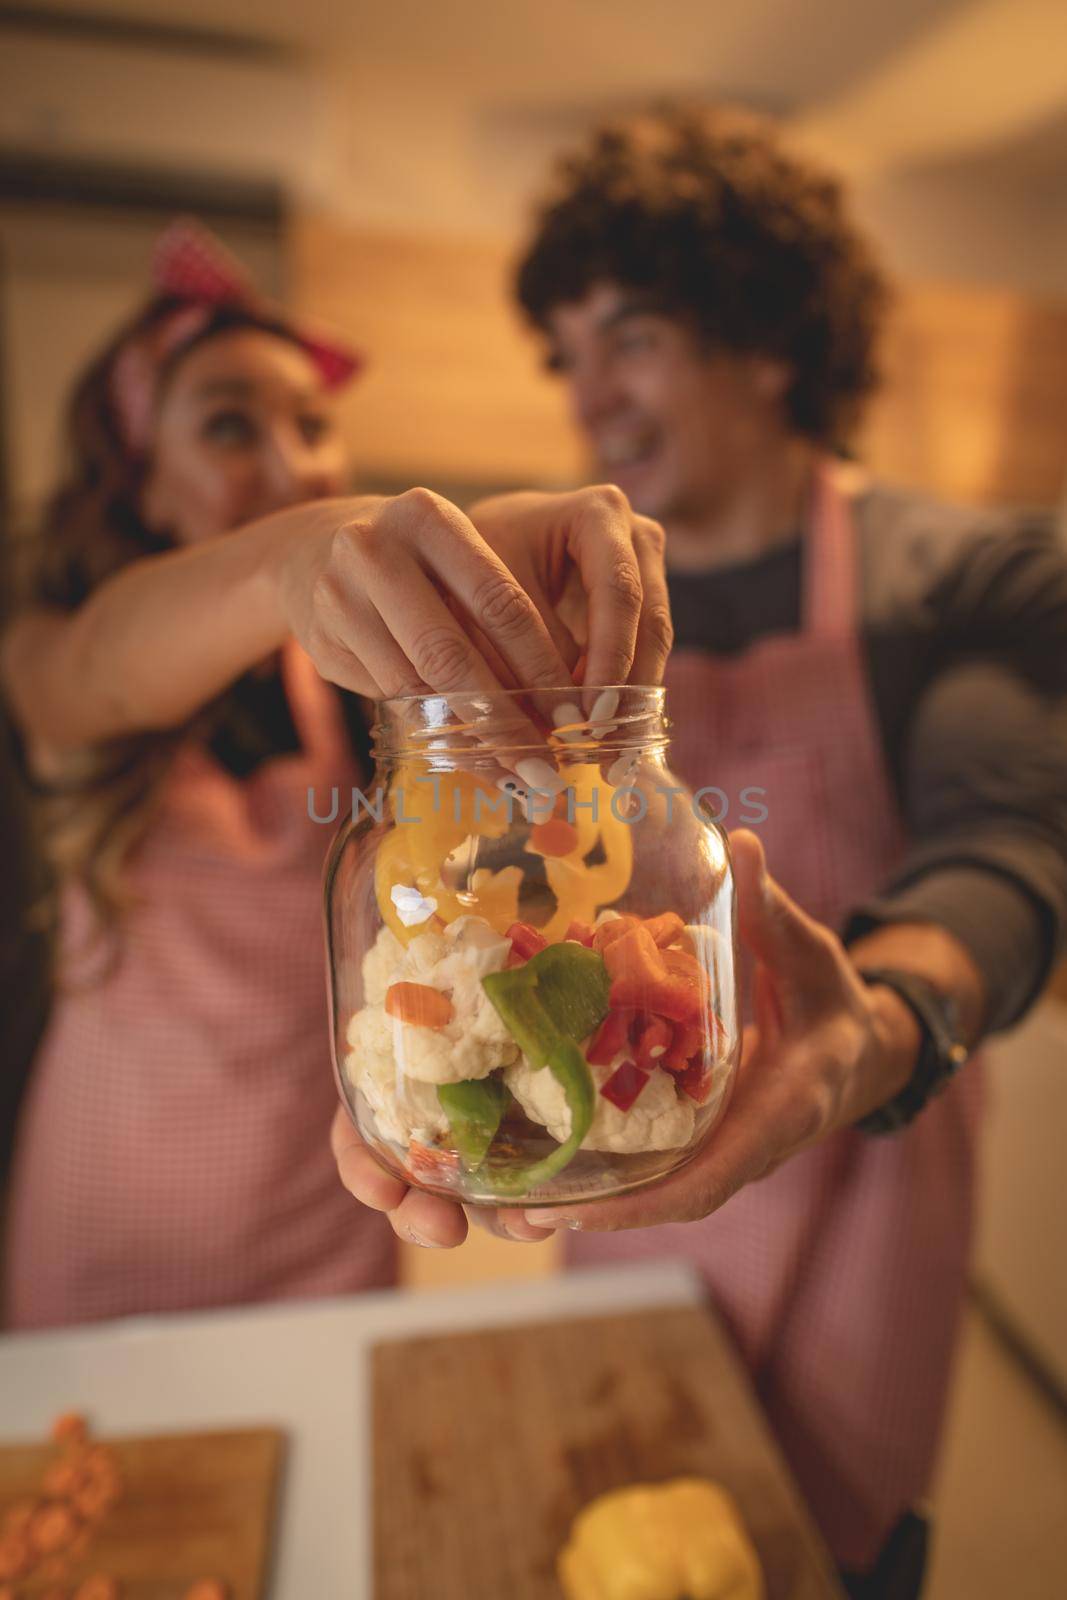 Cute couple is putting vegetables in a jar and smiling while making pickle in kitchen at home